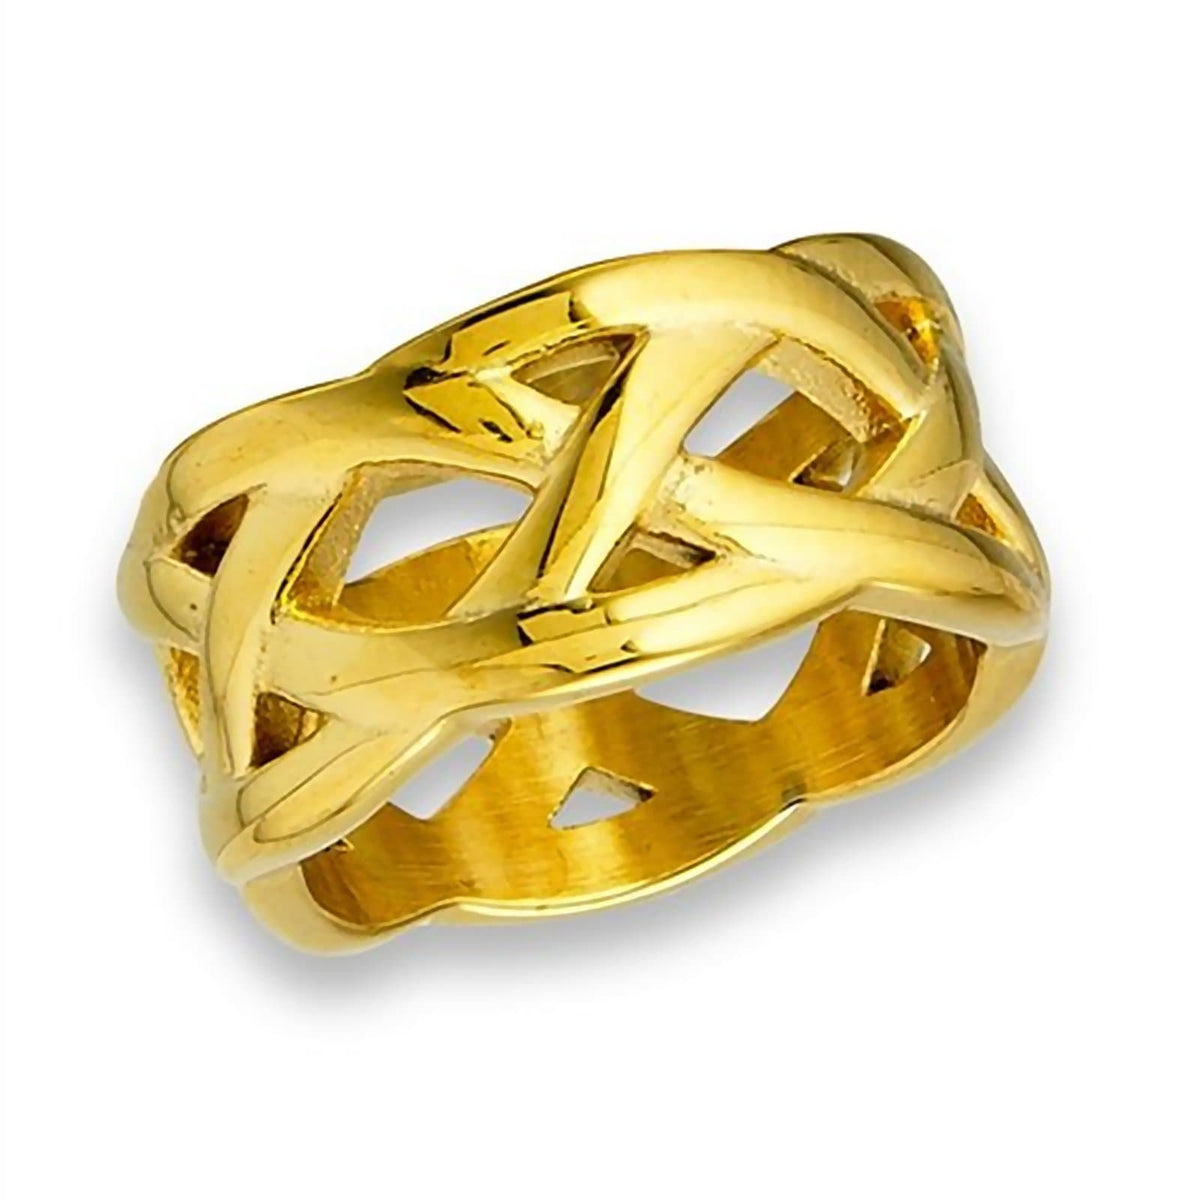 Gold Celtic Knot Stainless Steel Ring - Hypoallergenic Wedding Band